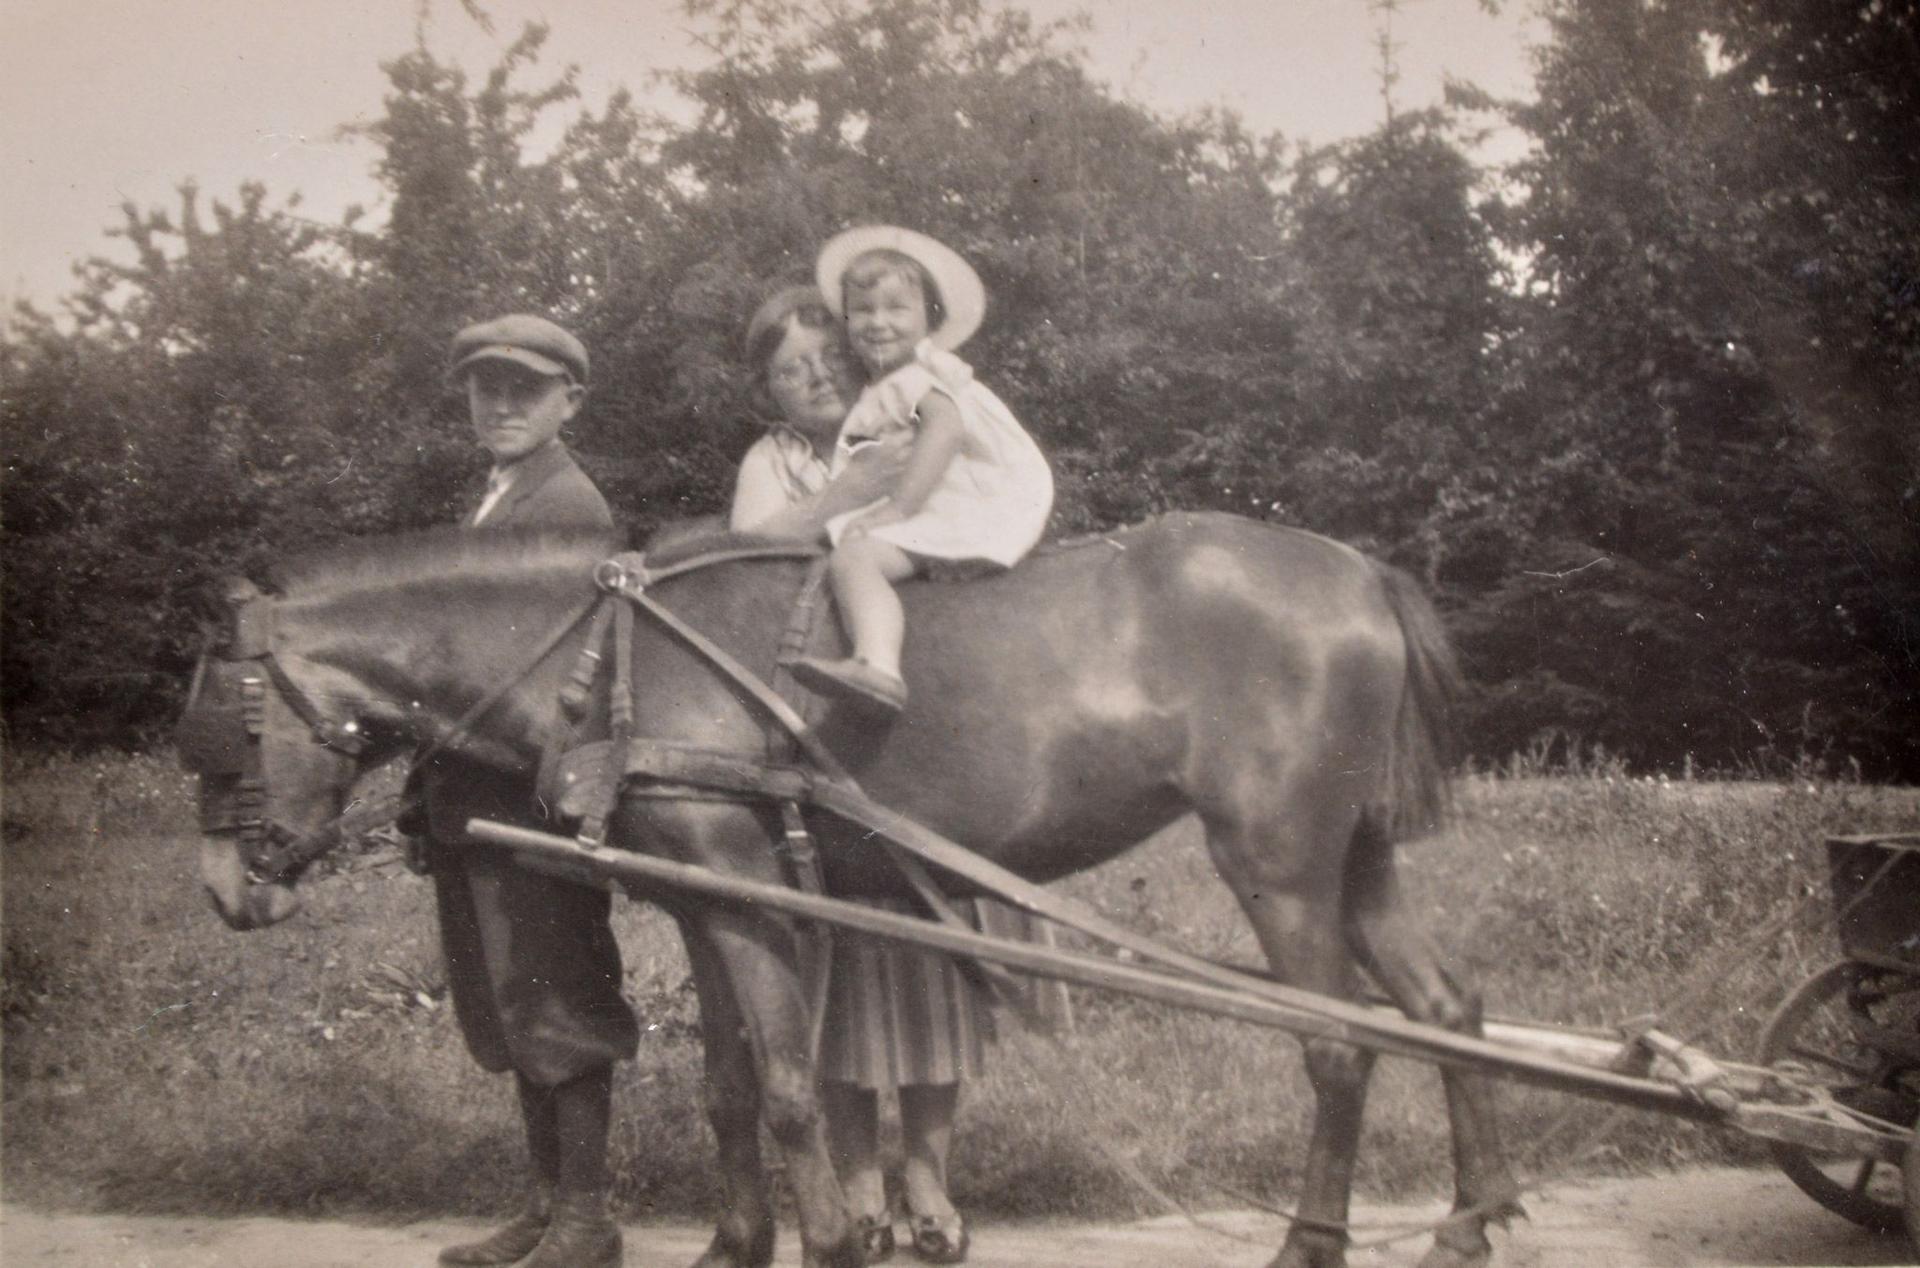 A black and white photograph of girl on a pony with two people around her